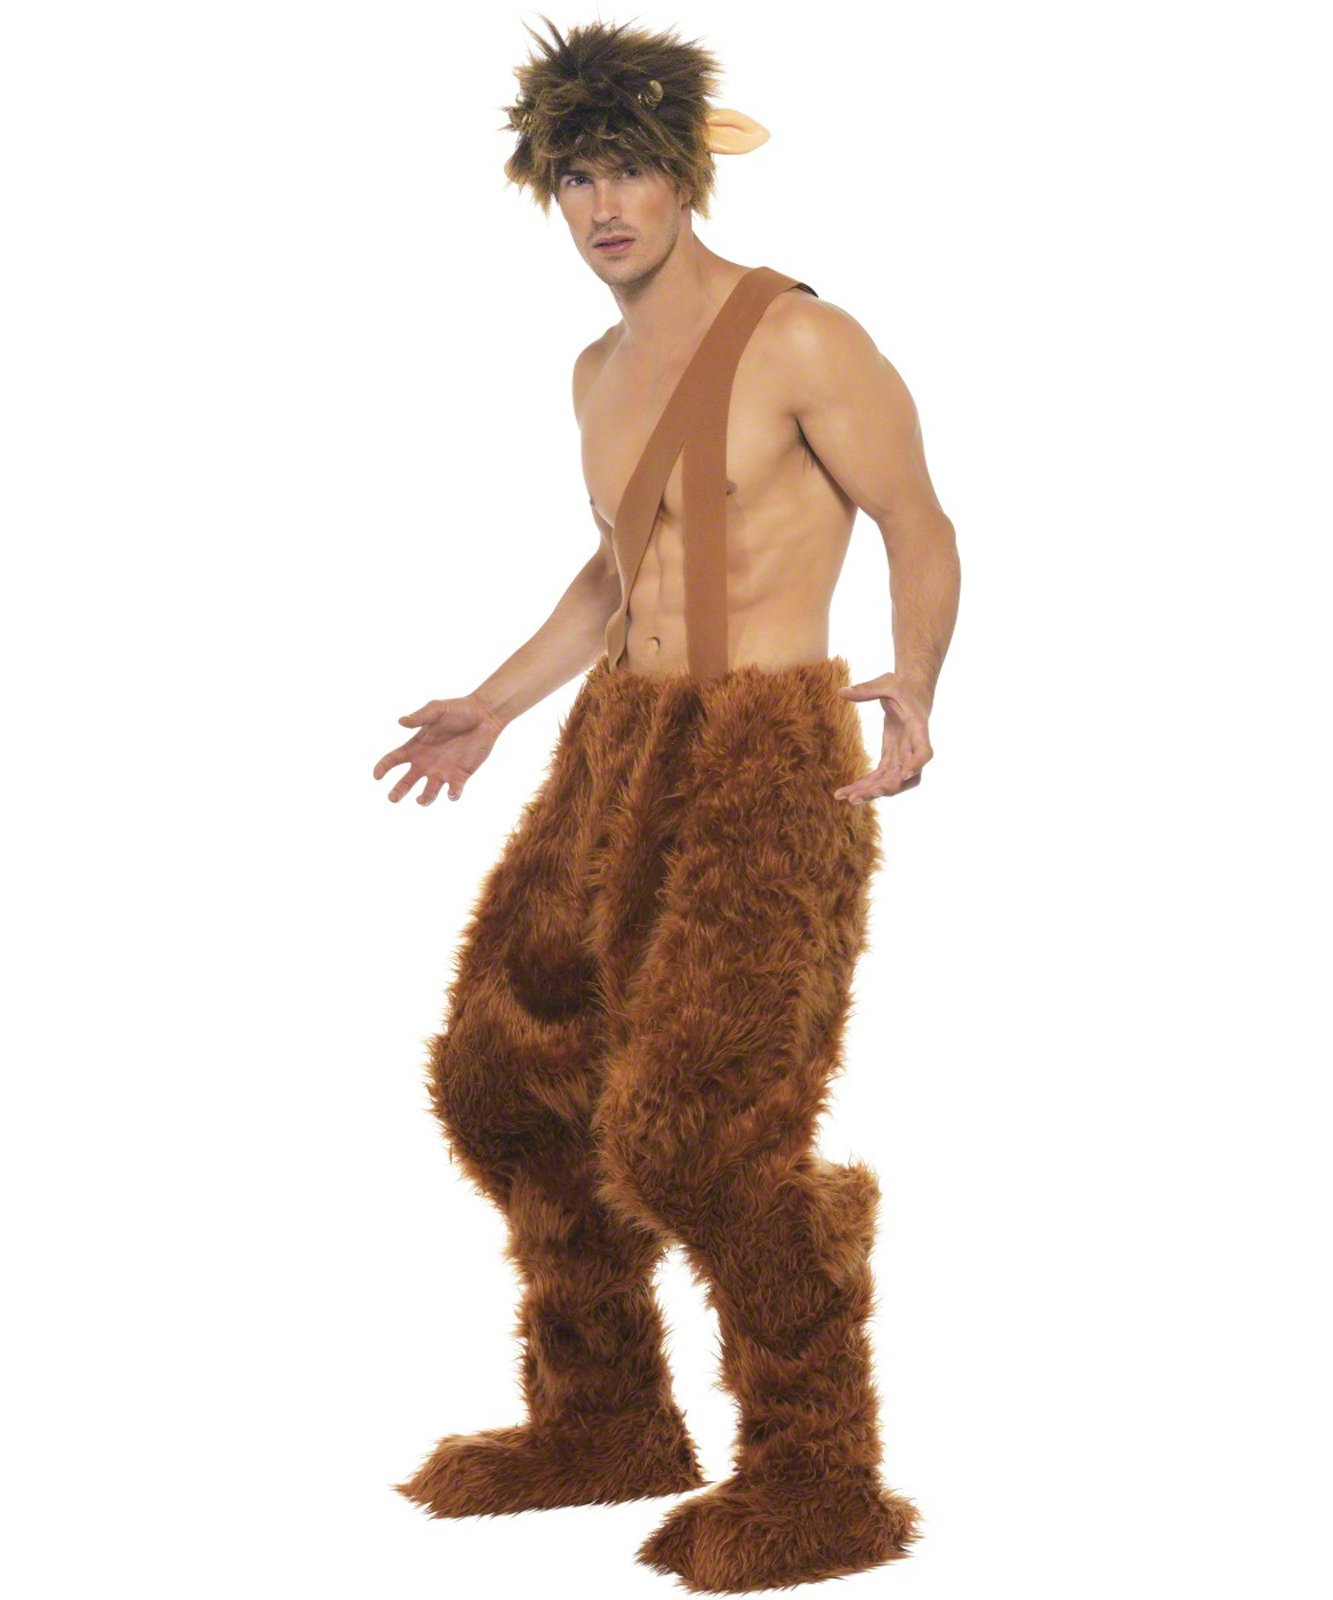 This Pan Adult Costume includes faux fur trousers, shoe covers, and wig. 